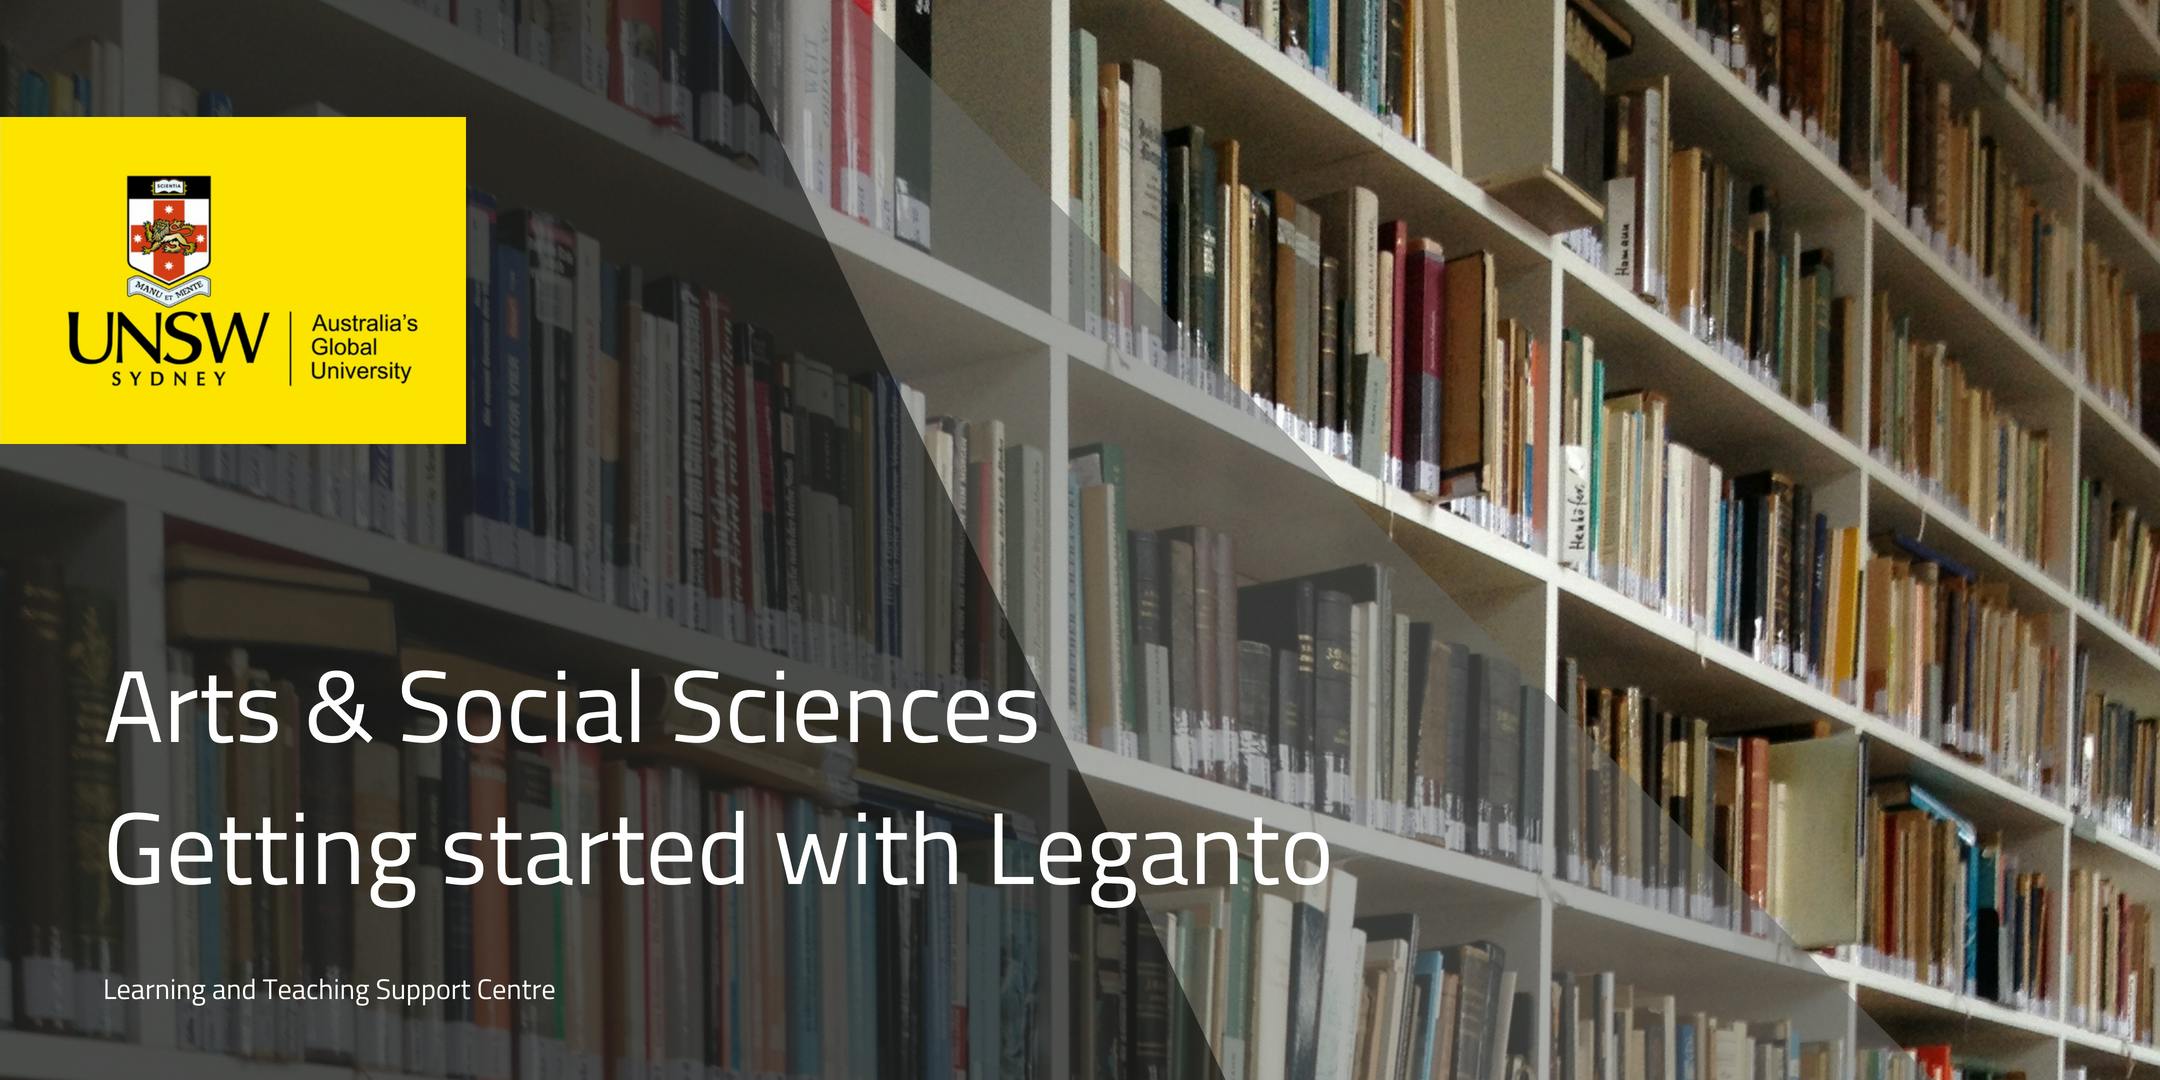 Faculty A&SS - Getting started with Leganto